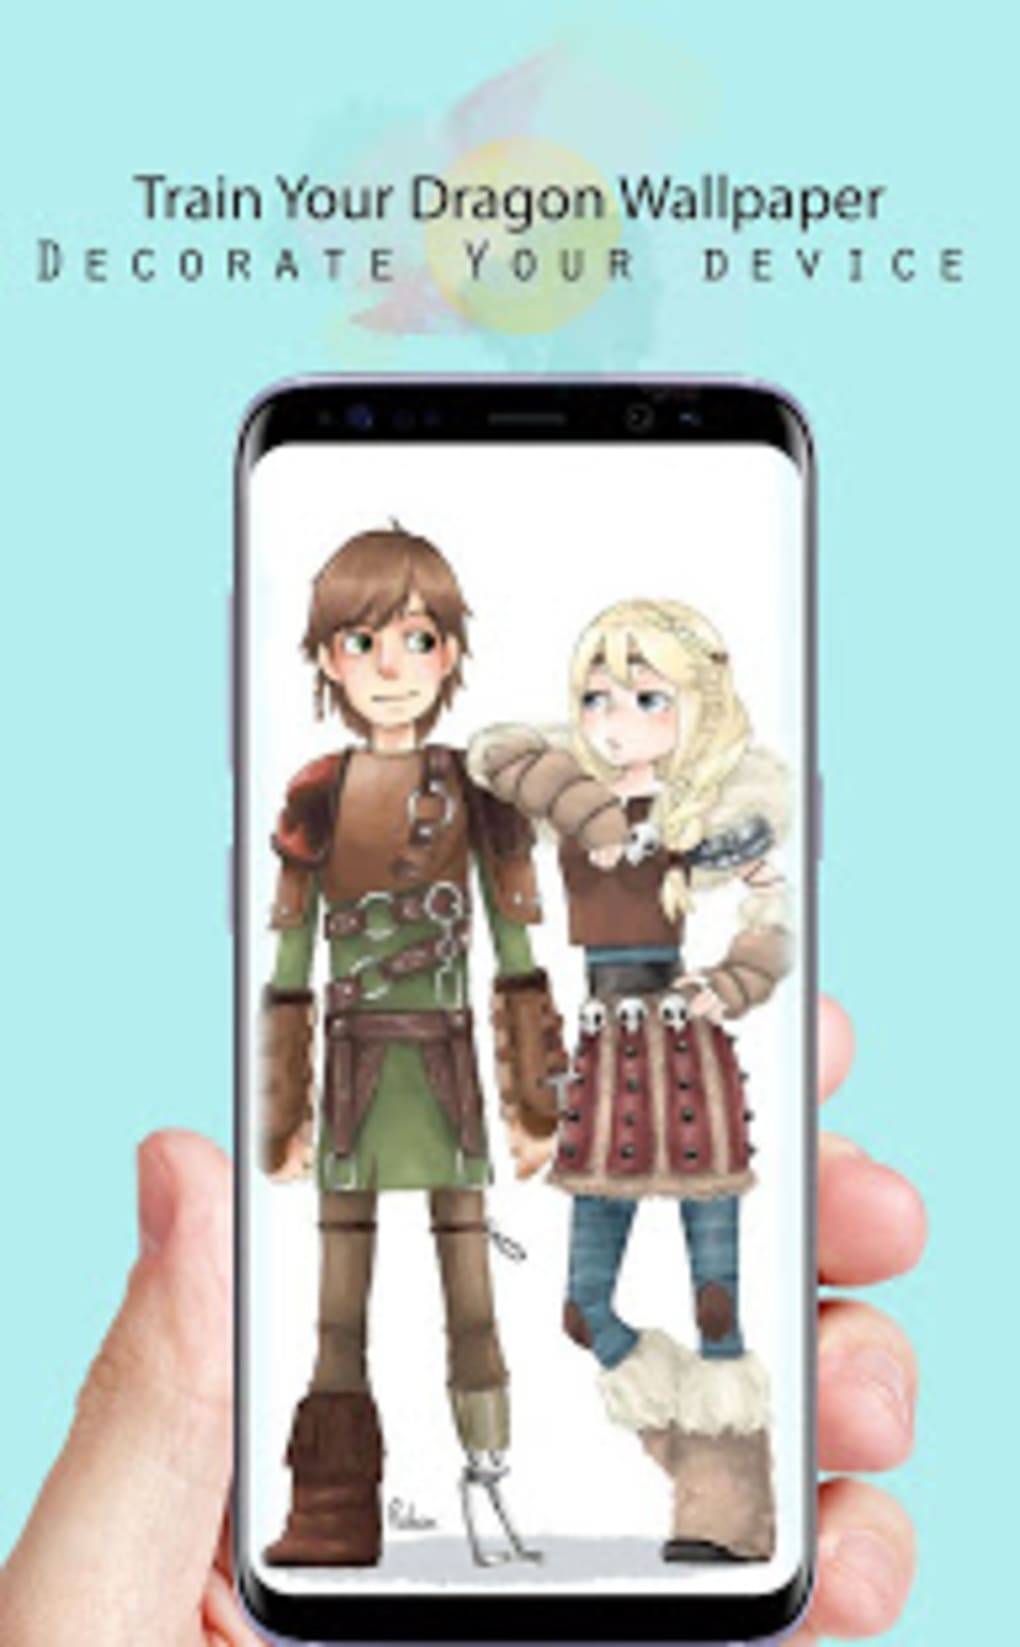 How To Train Your Dragon 3 Wallpaper For Android Download